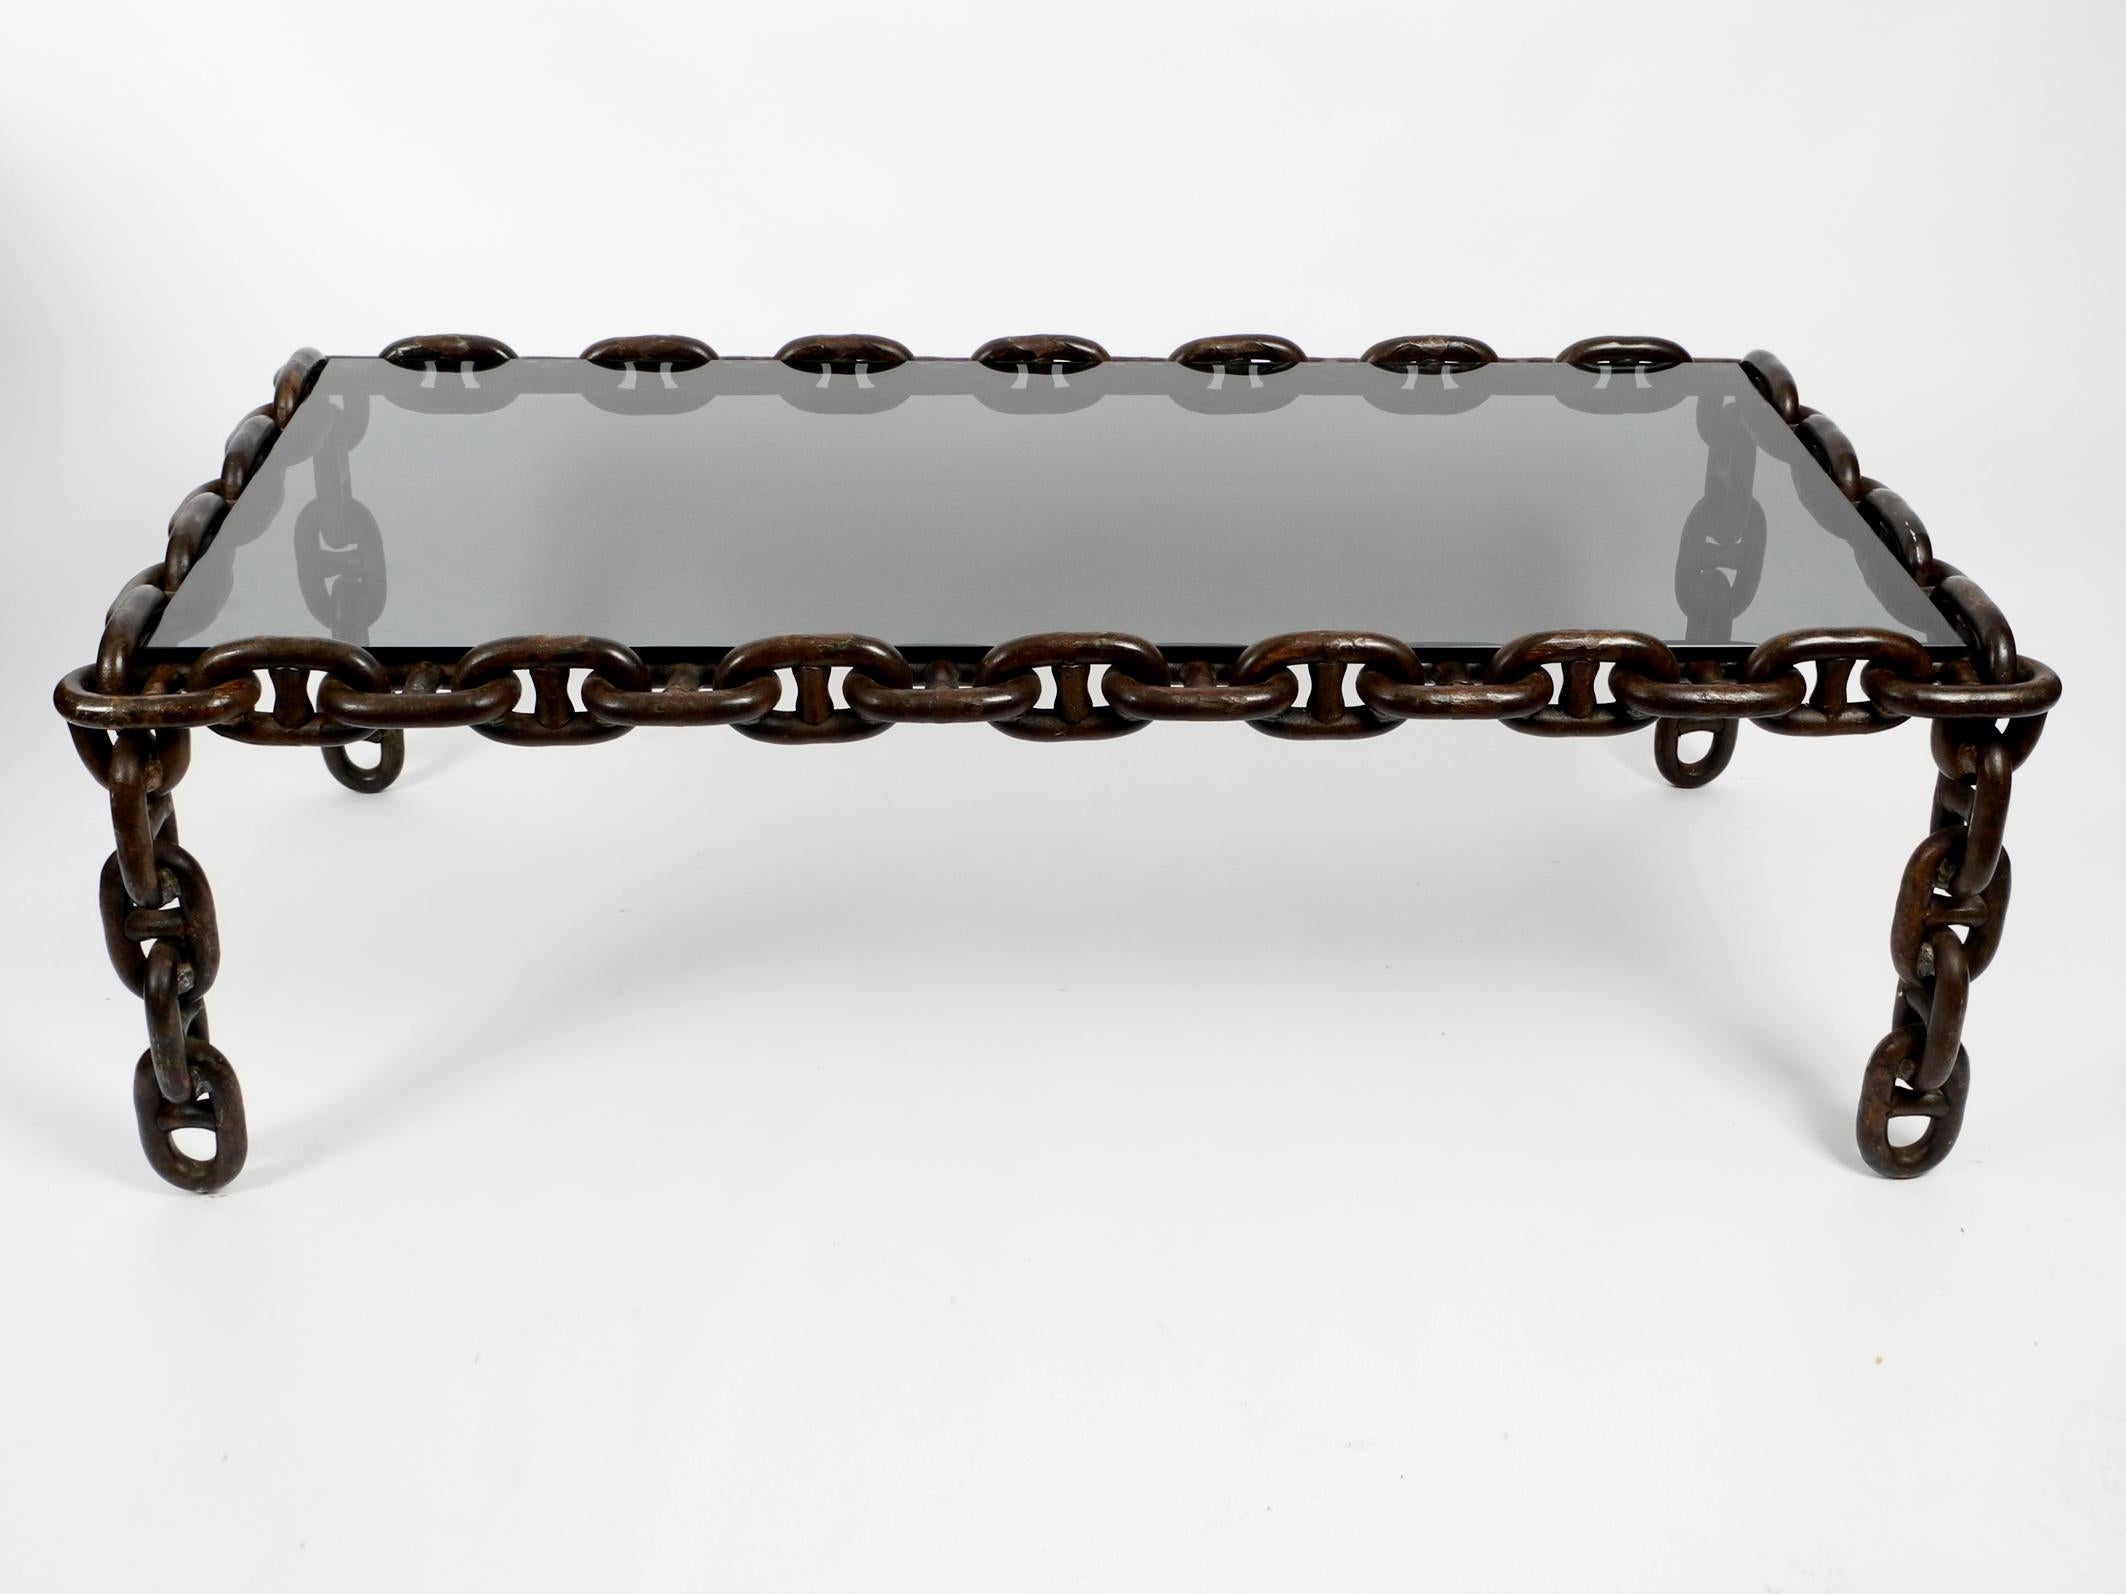 table made with chains